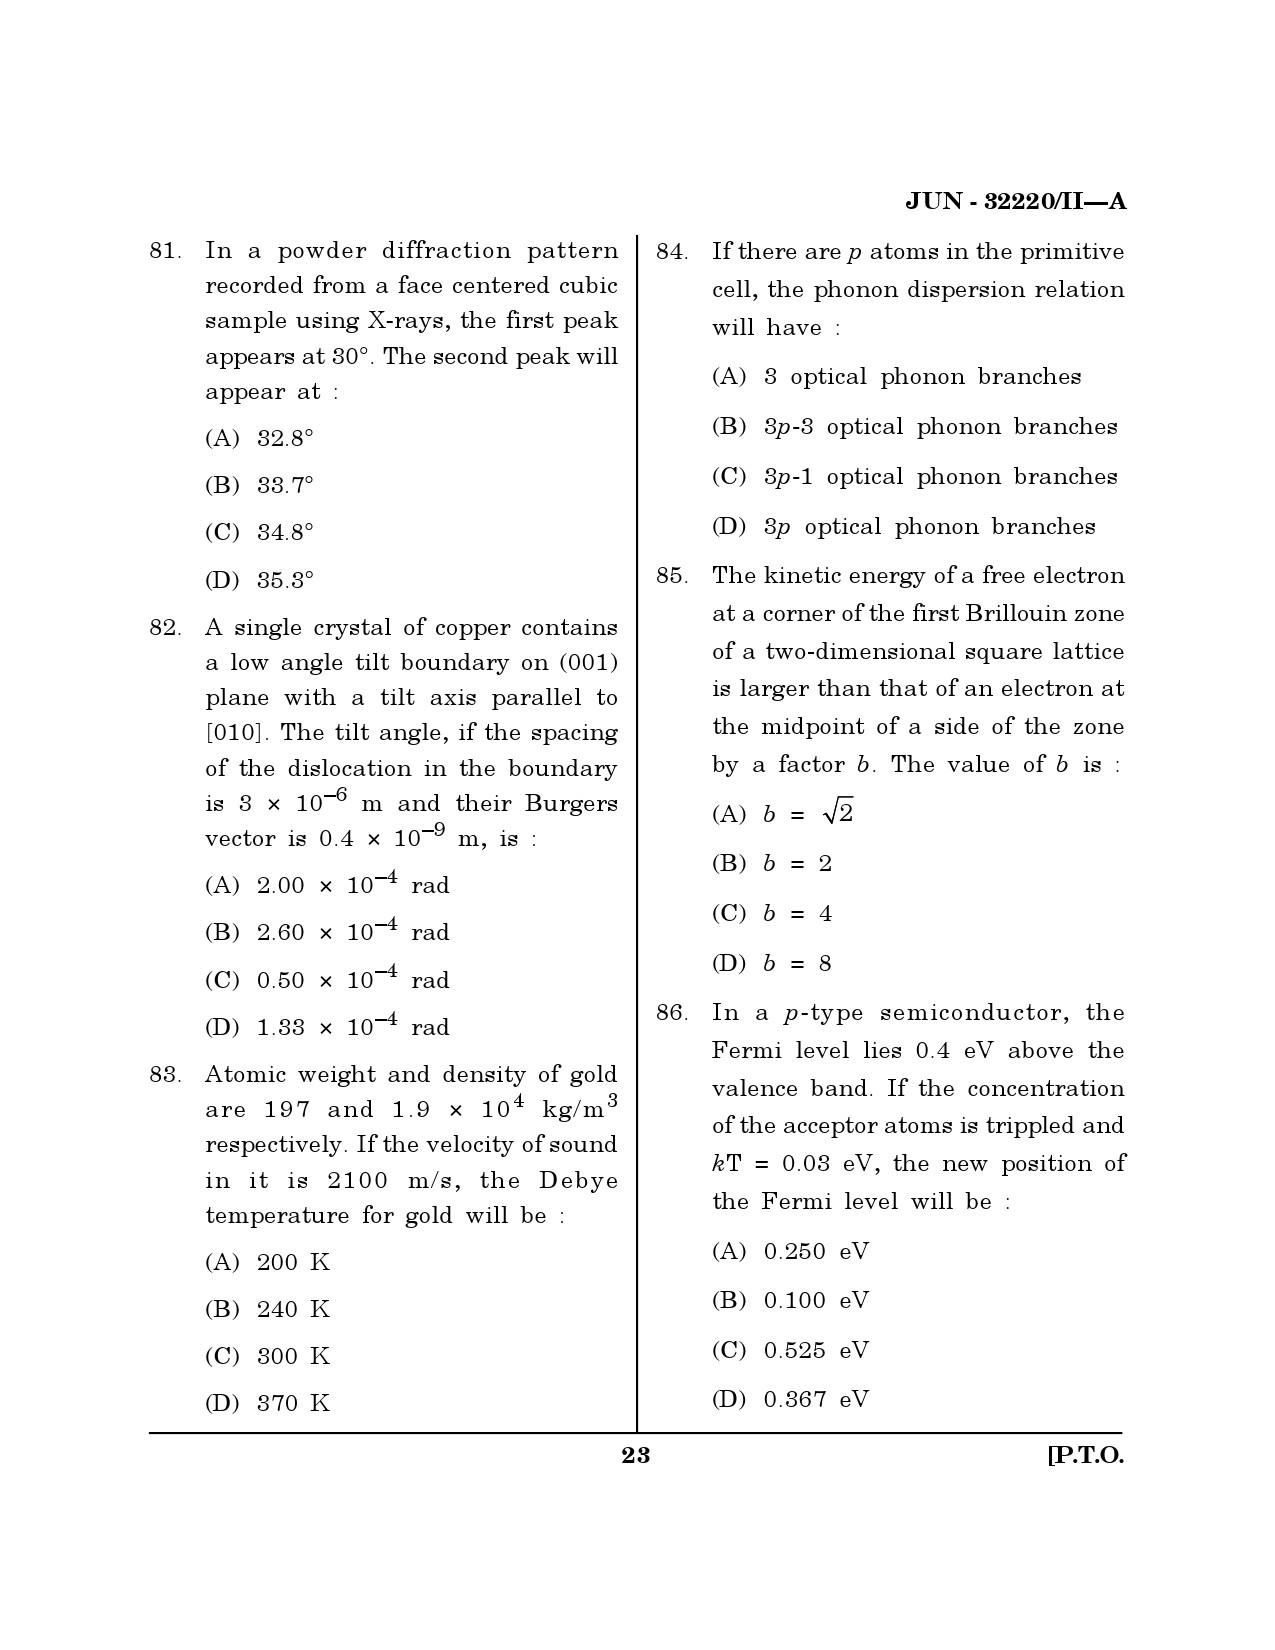 Maharashtra SET Physical Science Question Paper II June 2020 22